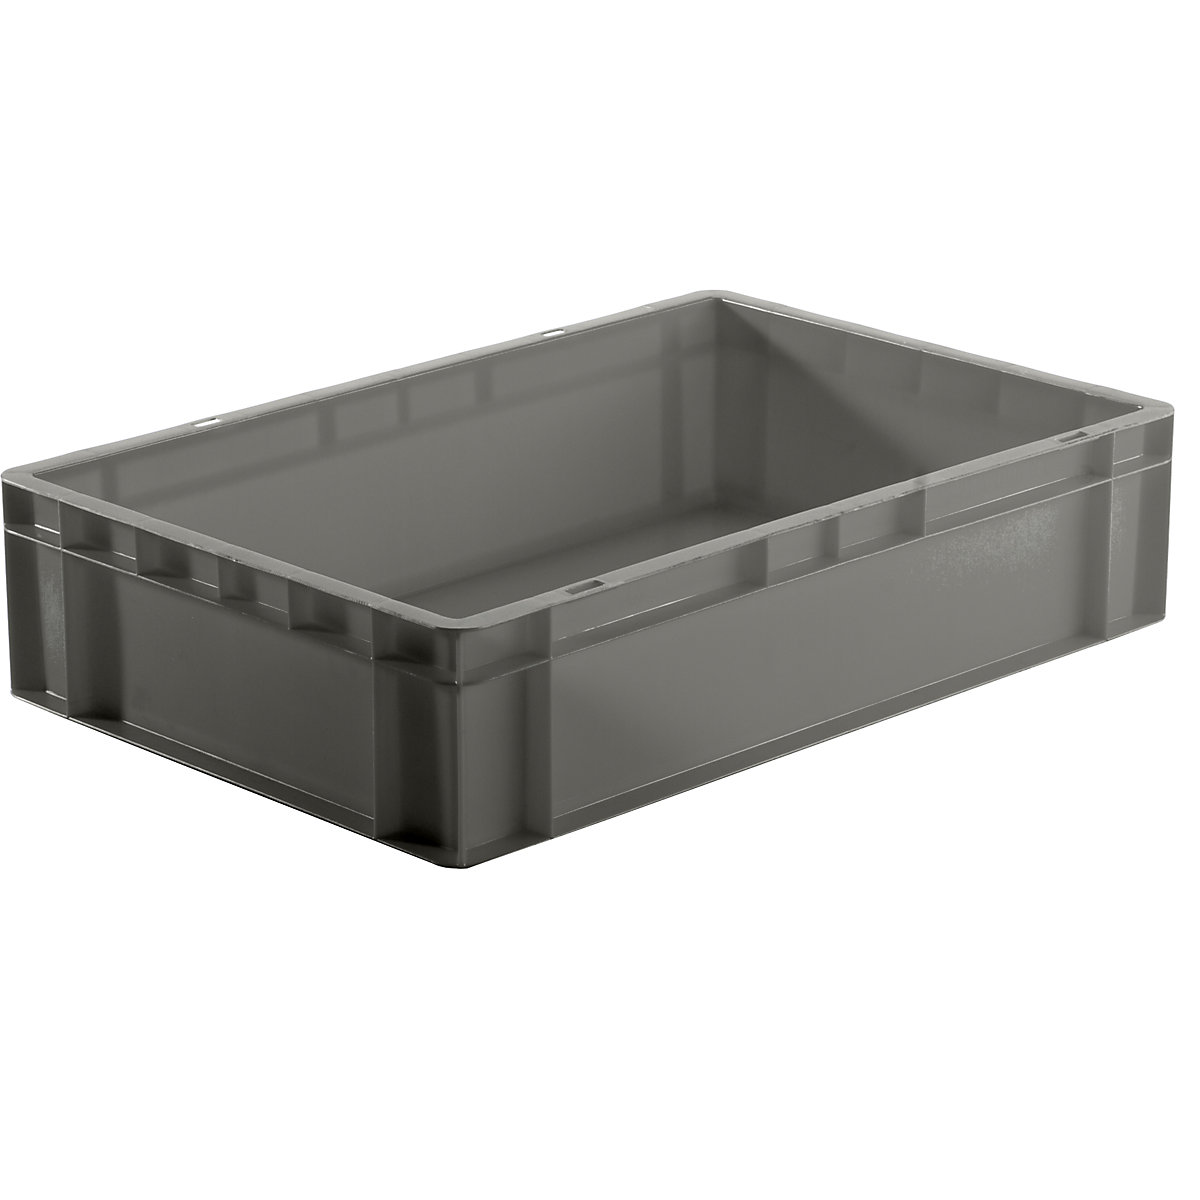 Euro stacking container, closed walls and base, LxWxH 600 x 400 x 145 mm, grey, pack of 5-6